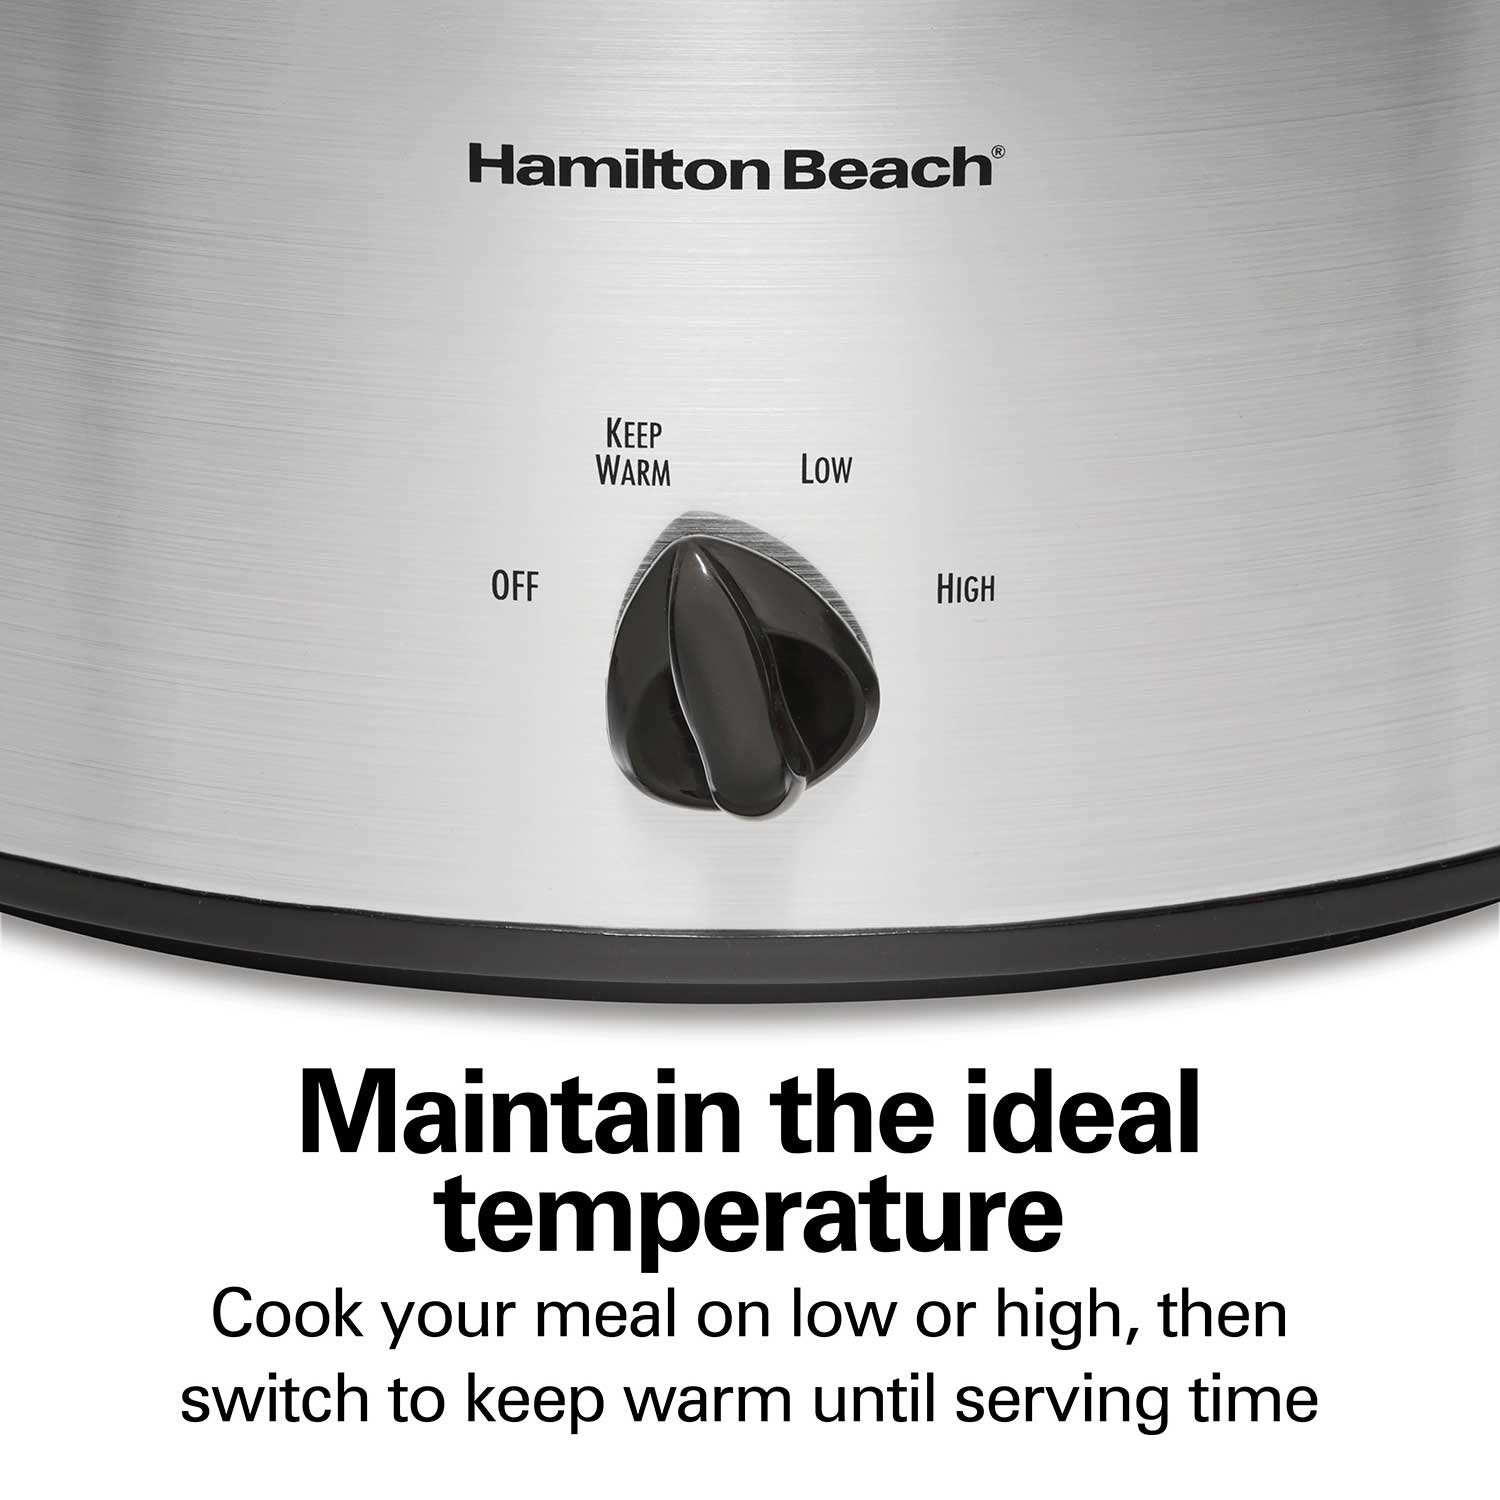 Hamilton Beach Stay or Go 6 Quart Slow Cooker in Stainless Steel 33162 - Hamilton  Beach Slow Cooker